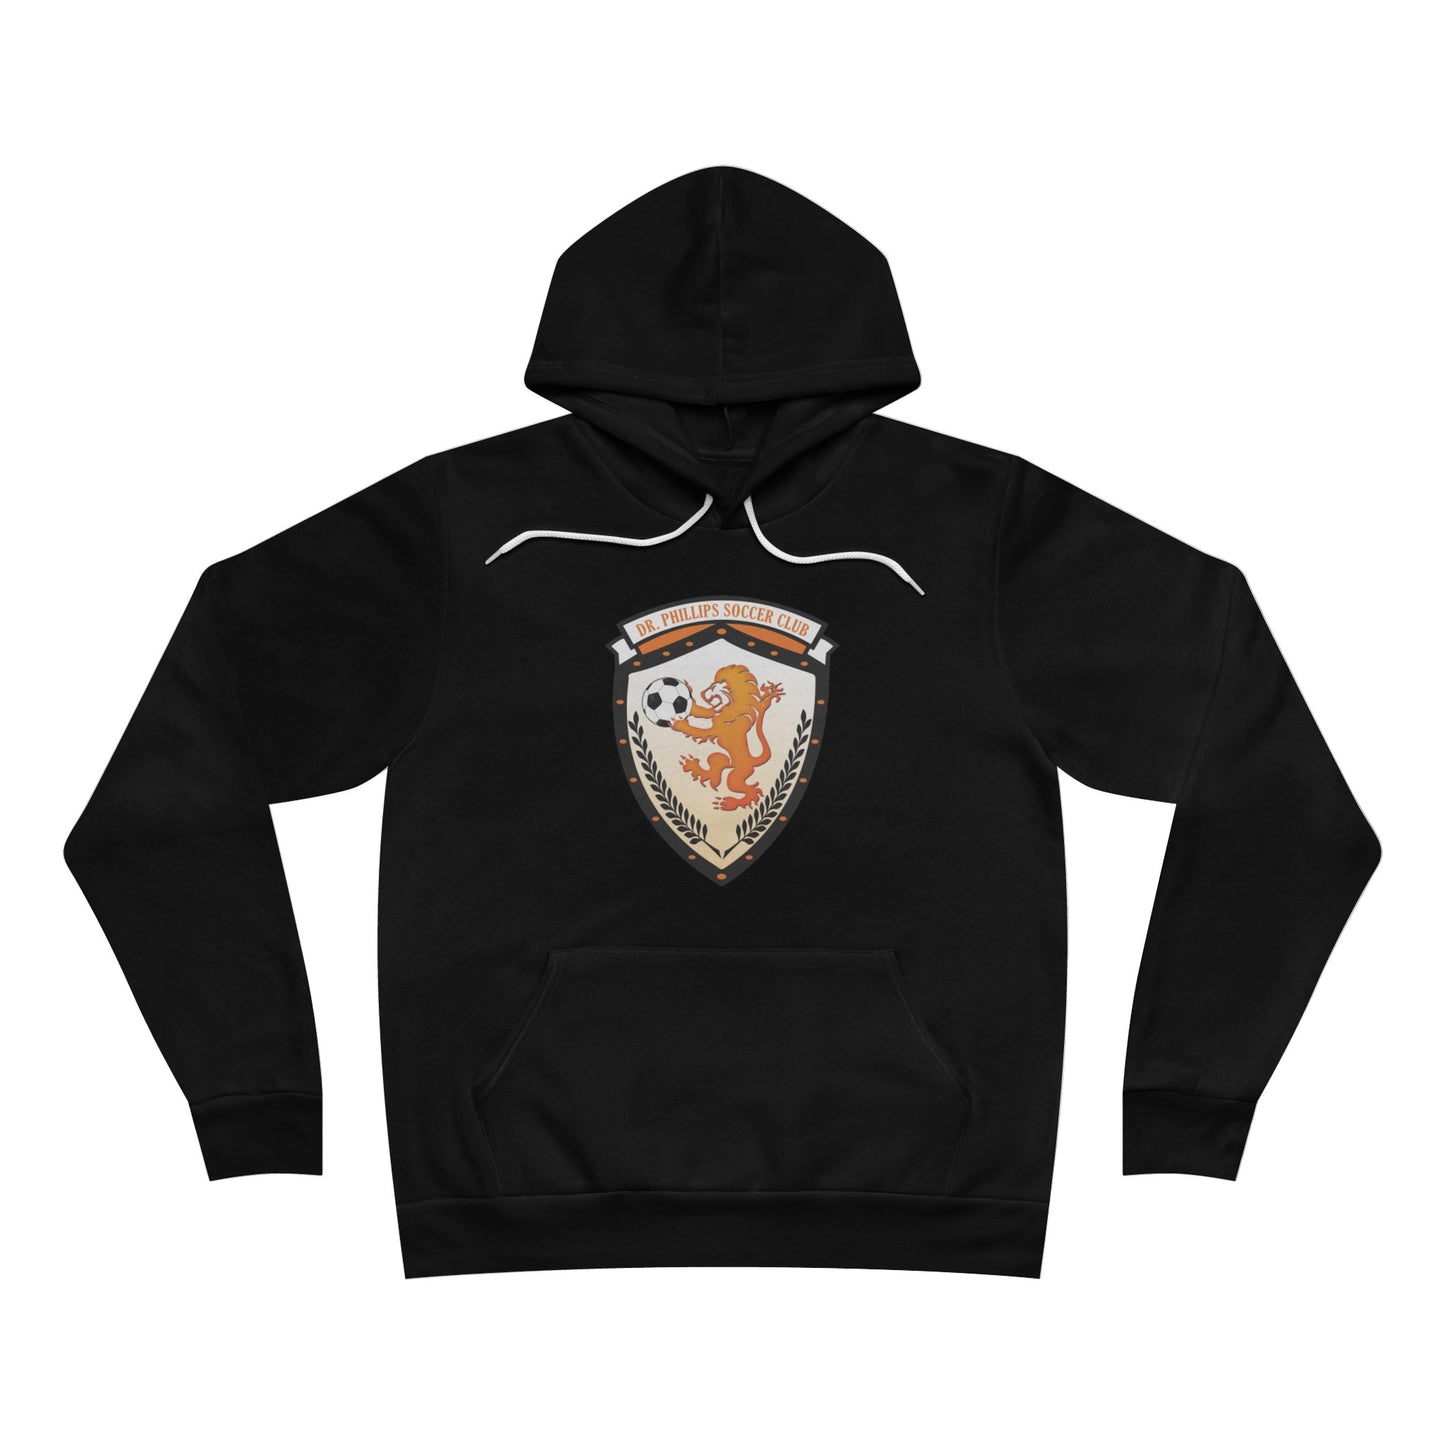 Dr. Phillips Soccer Club Pitch Invaders Hoodie (Unisex)